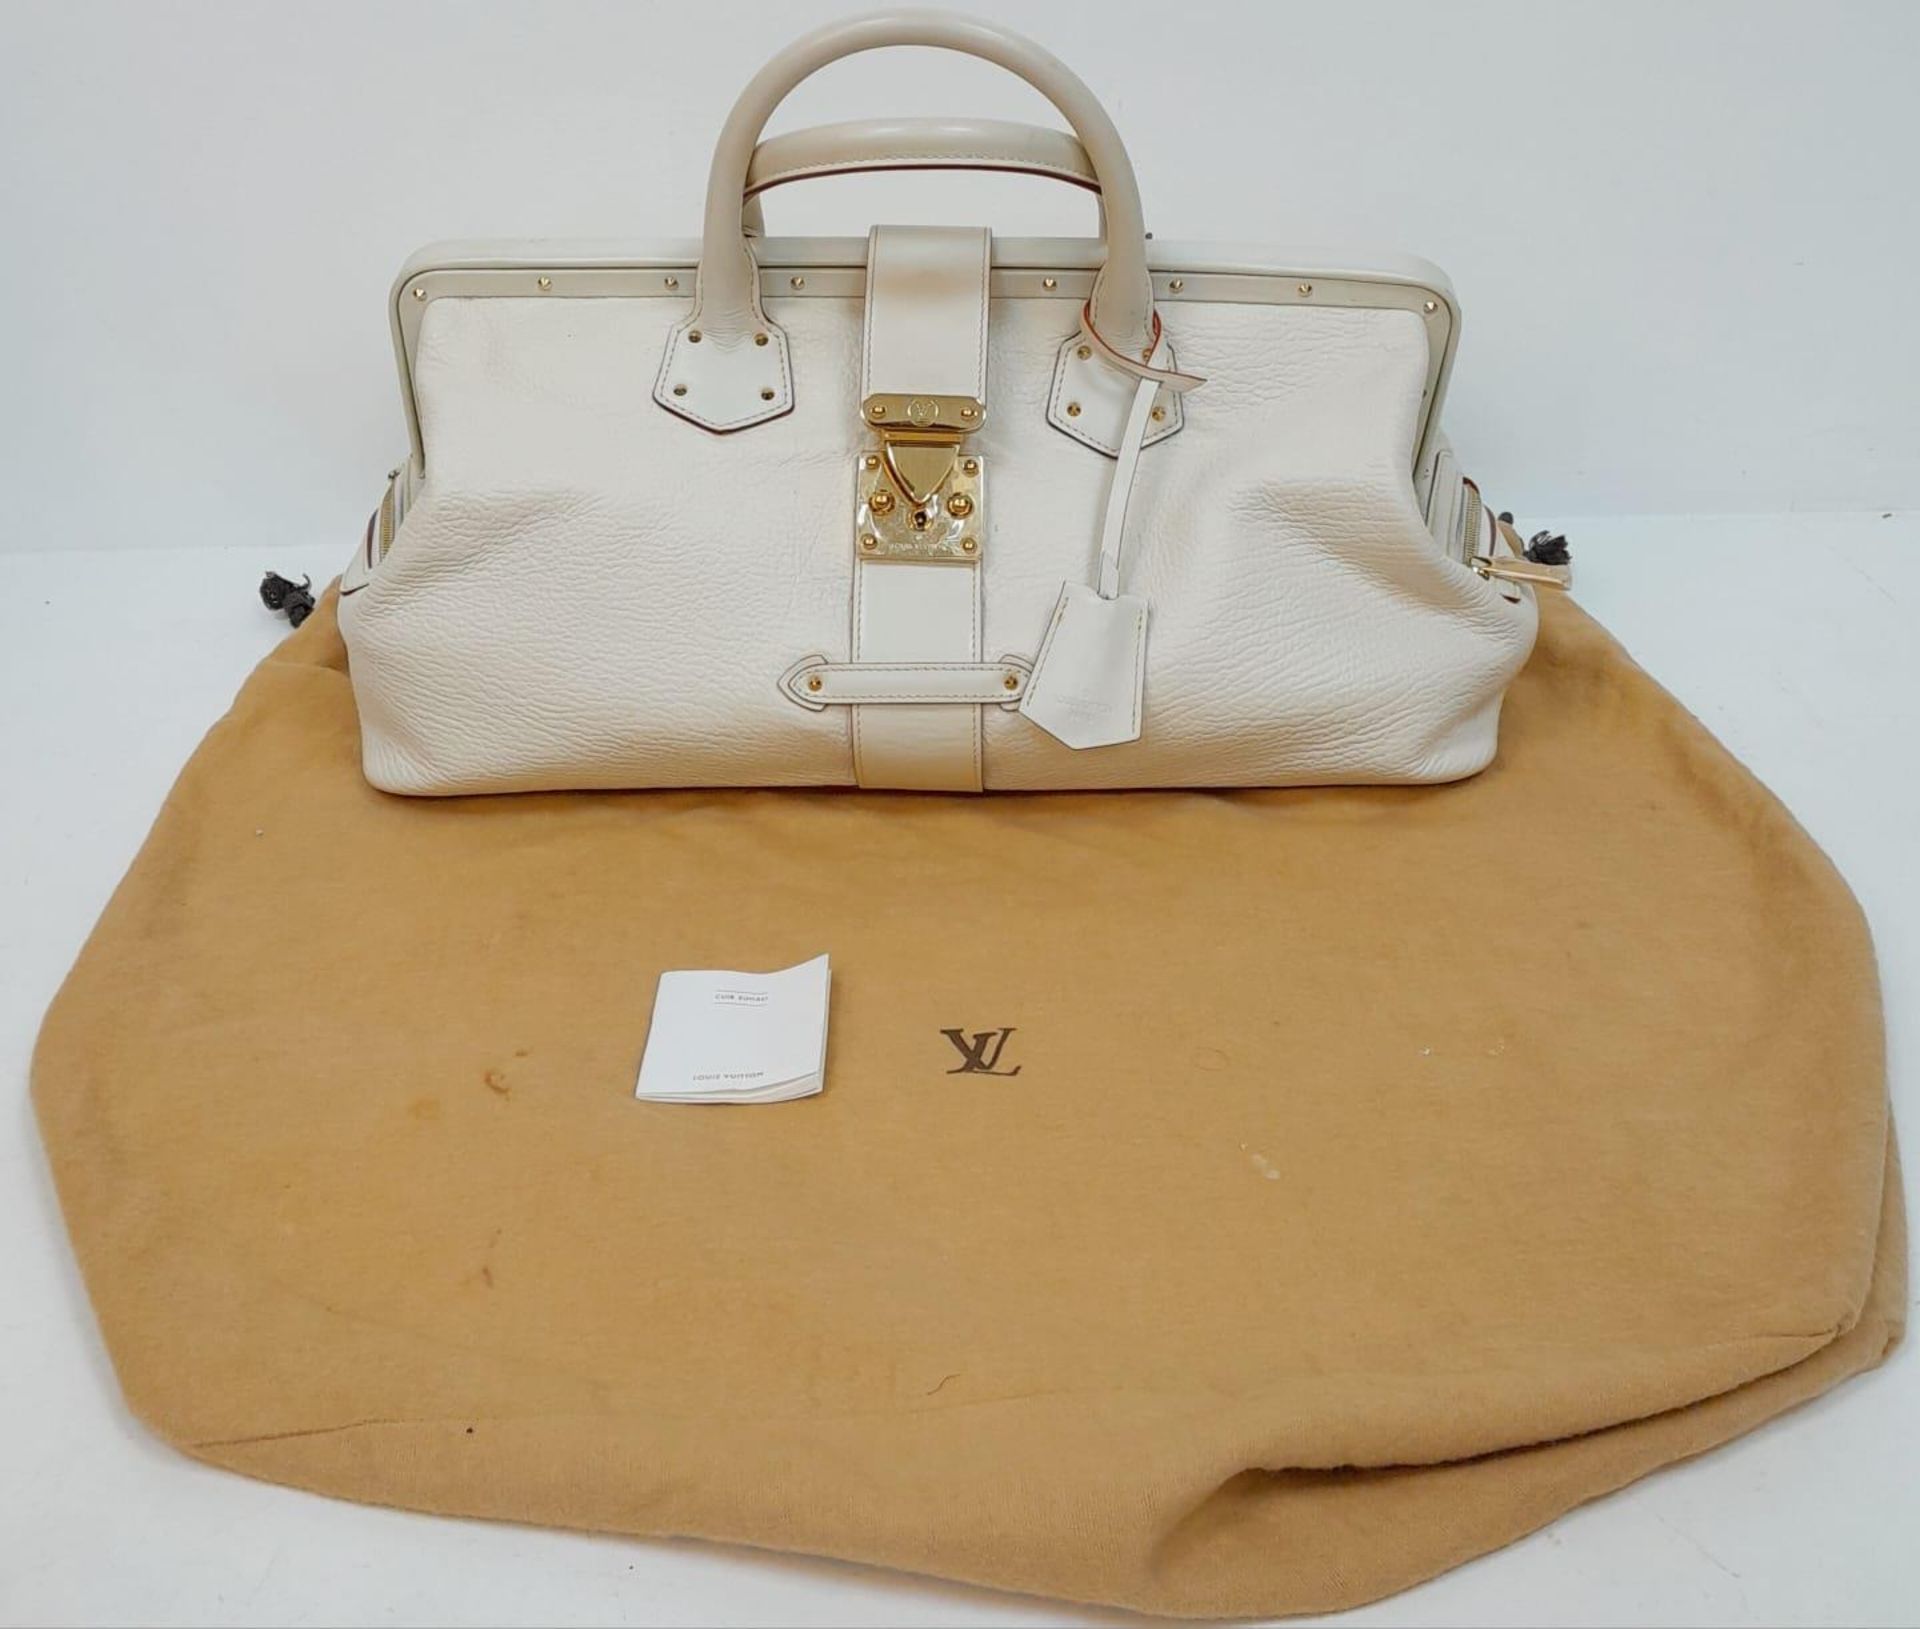 A Louis Vuitton Manhattan PM Suhali Leather Handbag. Soft white textured leather exterior with - Image 2 of 9